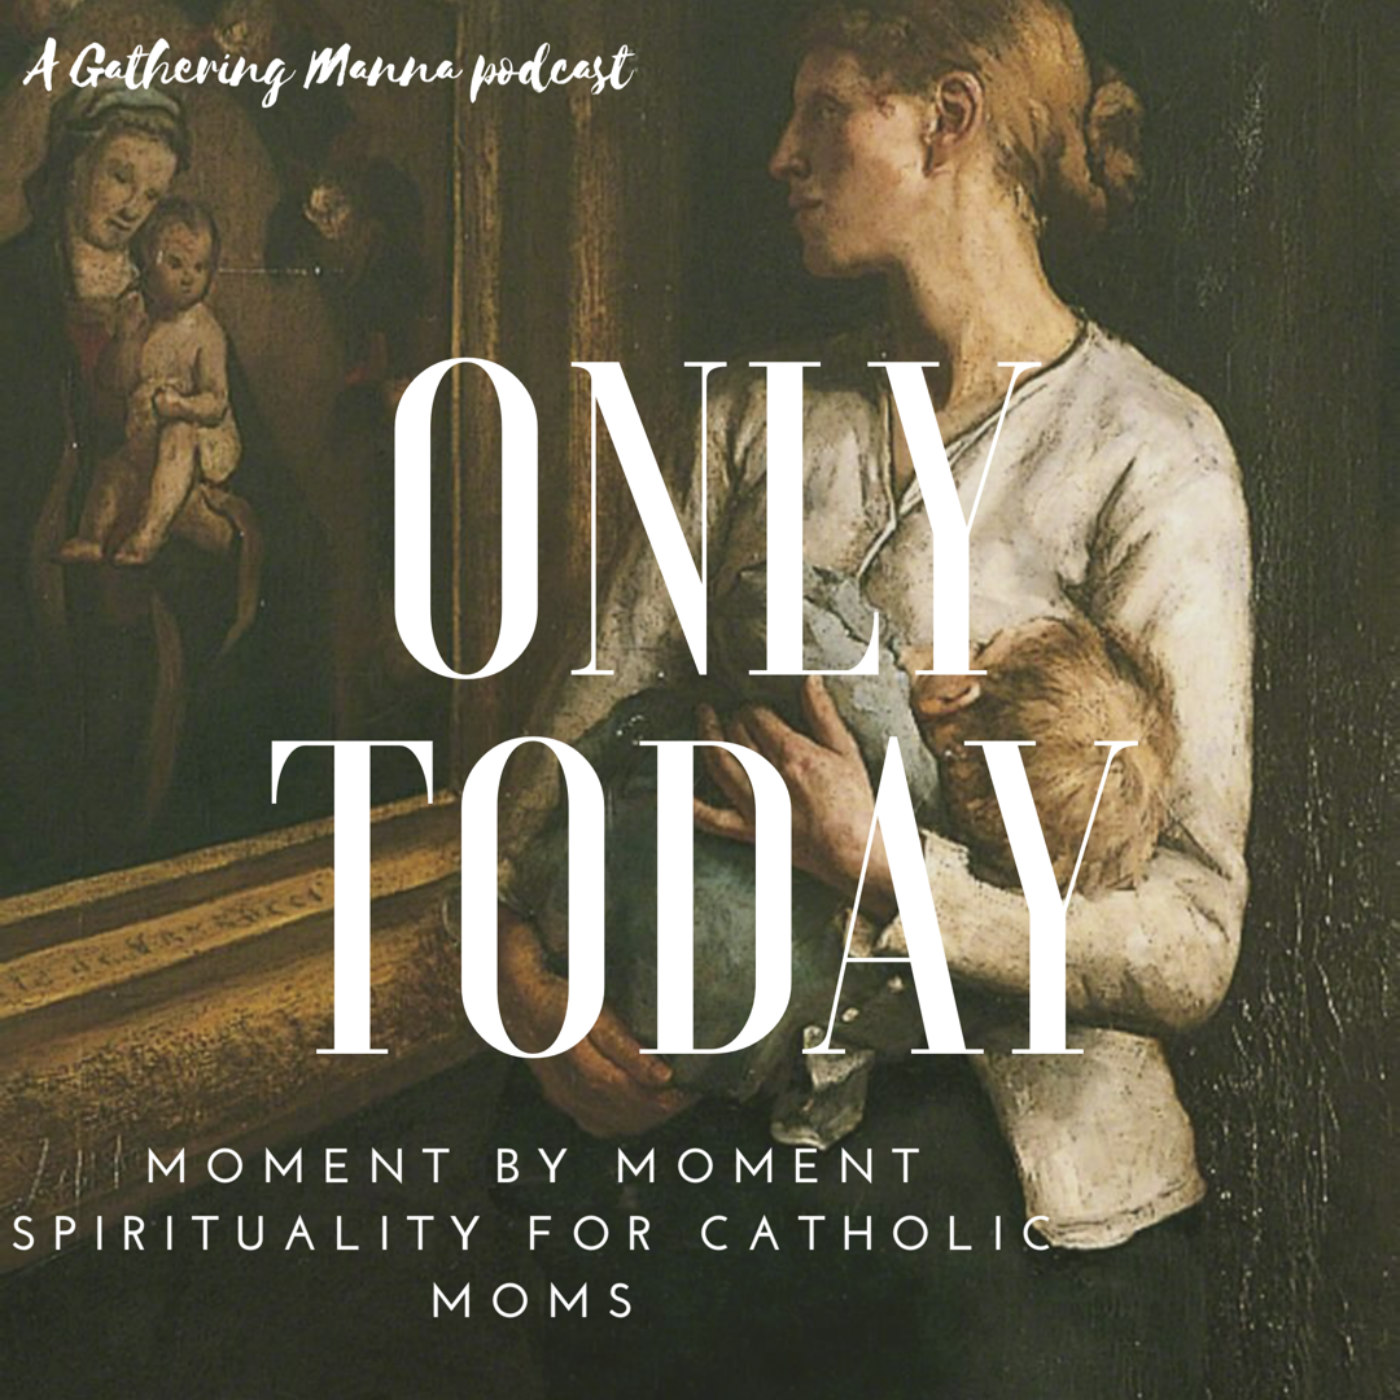 Pray with Me: Transforming Prayers for Catholic Moms pt.5: "The Litany of Humility" (Talk #1 of 3)